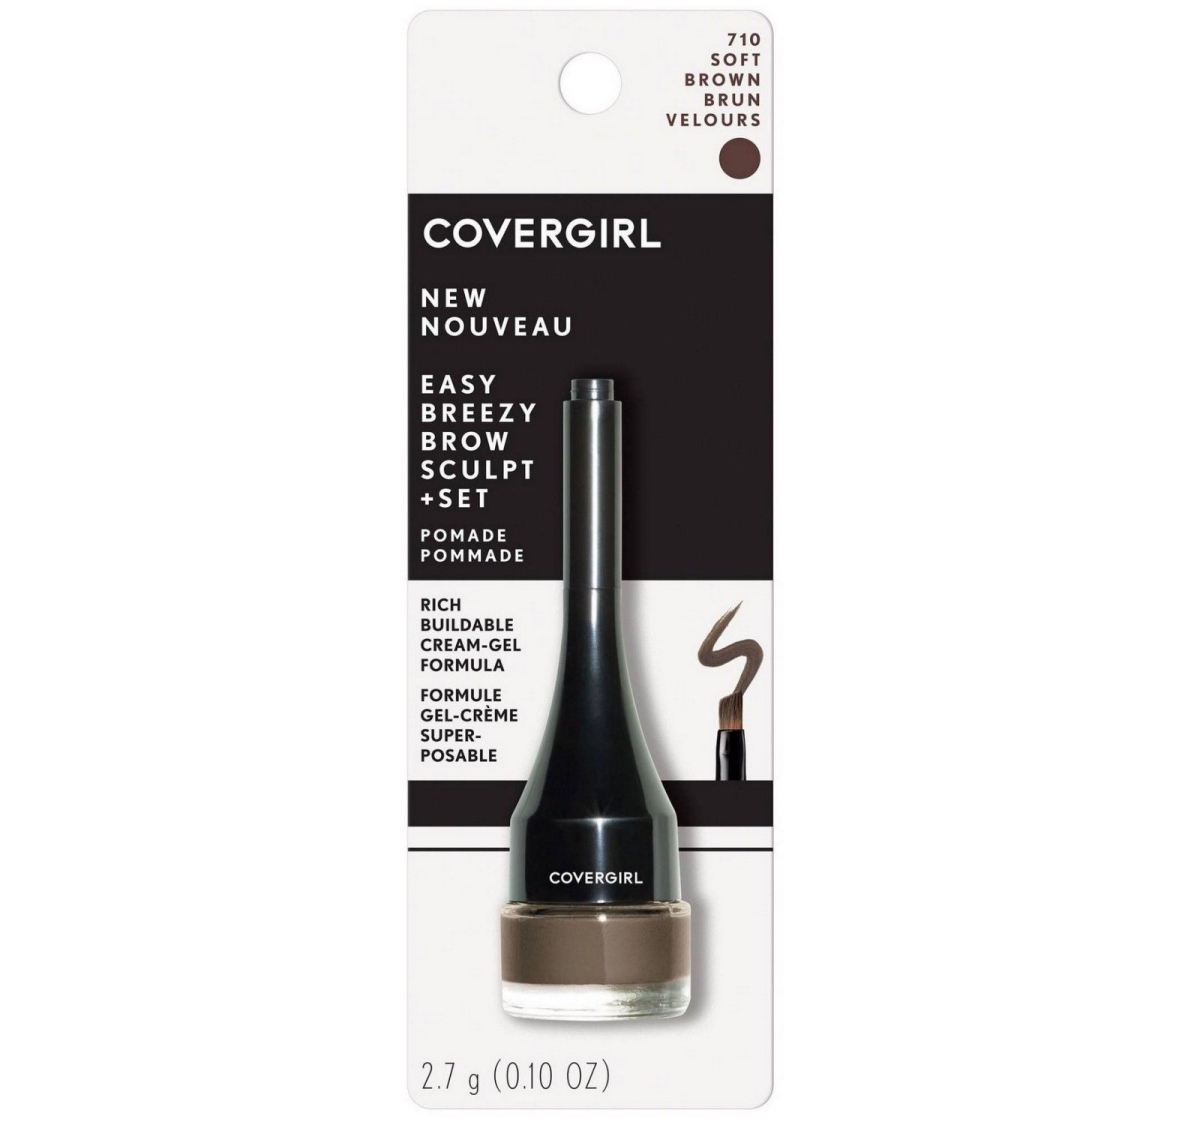 8163448 Covergirl Easy Breezy Eyebrow Sculpt Plus Set Pomade, 710 Soft Brown - Pack Of 2